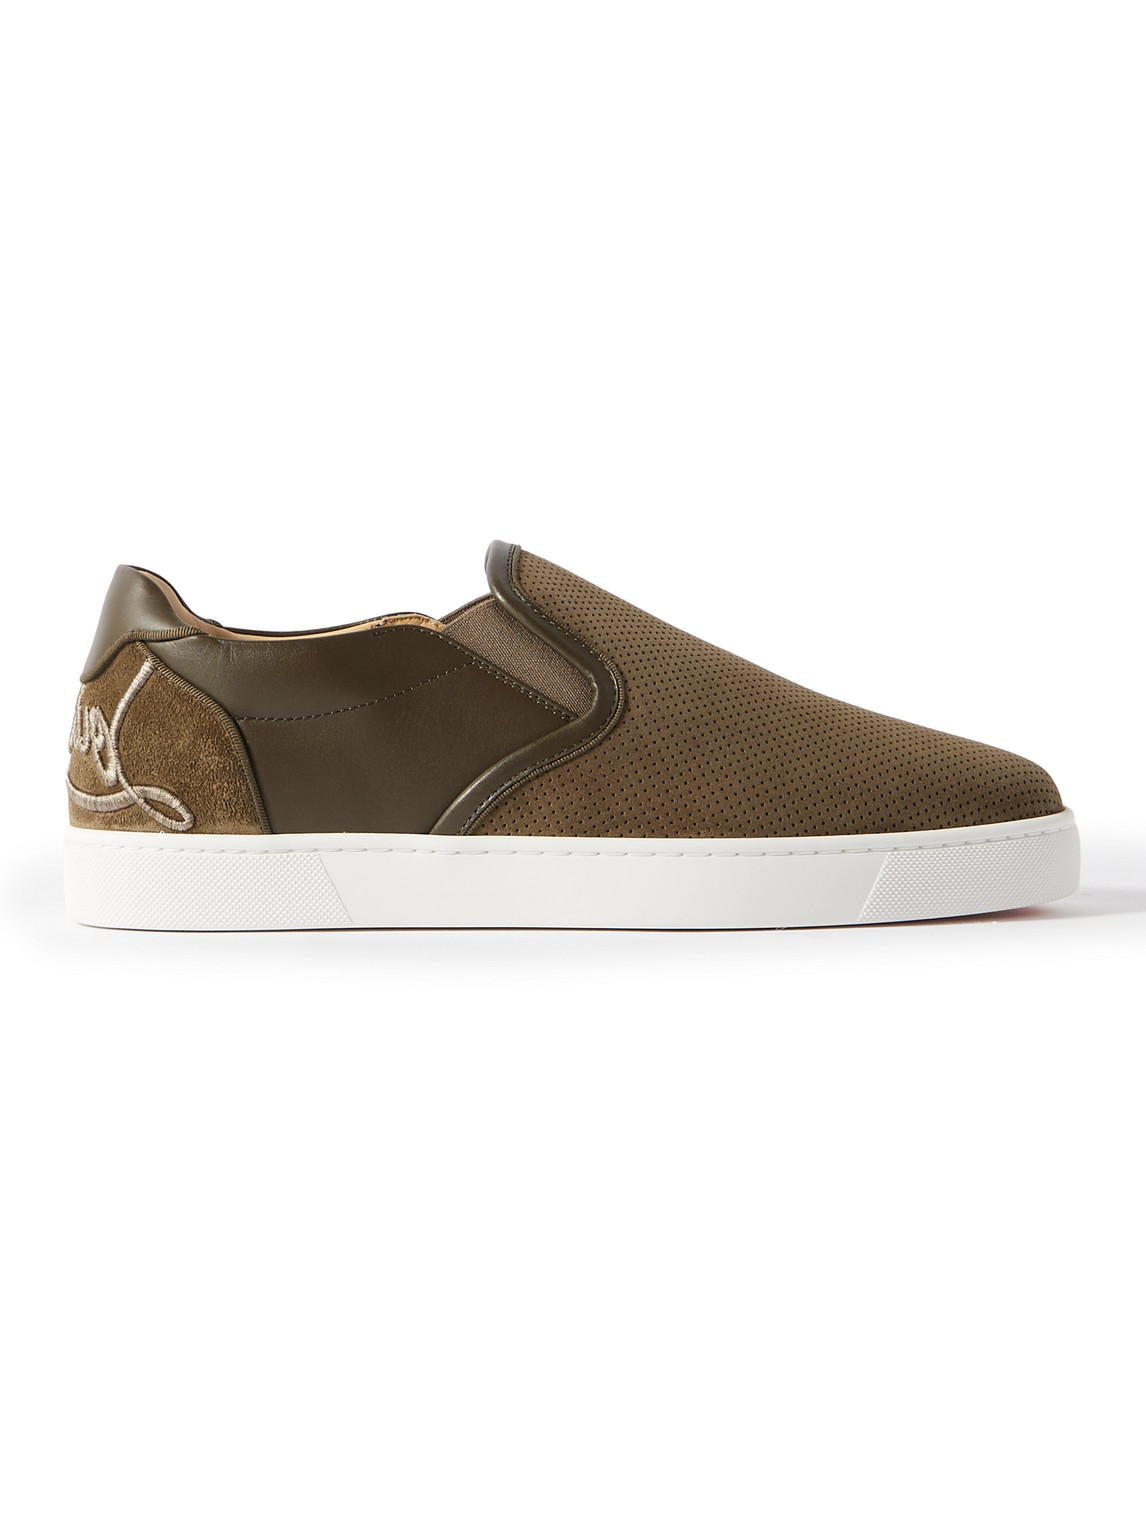 Christian Louboutin - Fun Sailor Leather-Trimmed Perforated Suede Slip-On Sneakers - Men - Green - EU 44 von Christian Louboutin